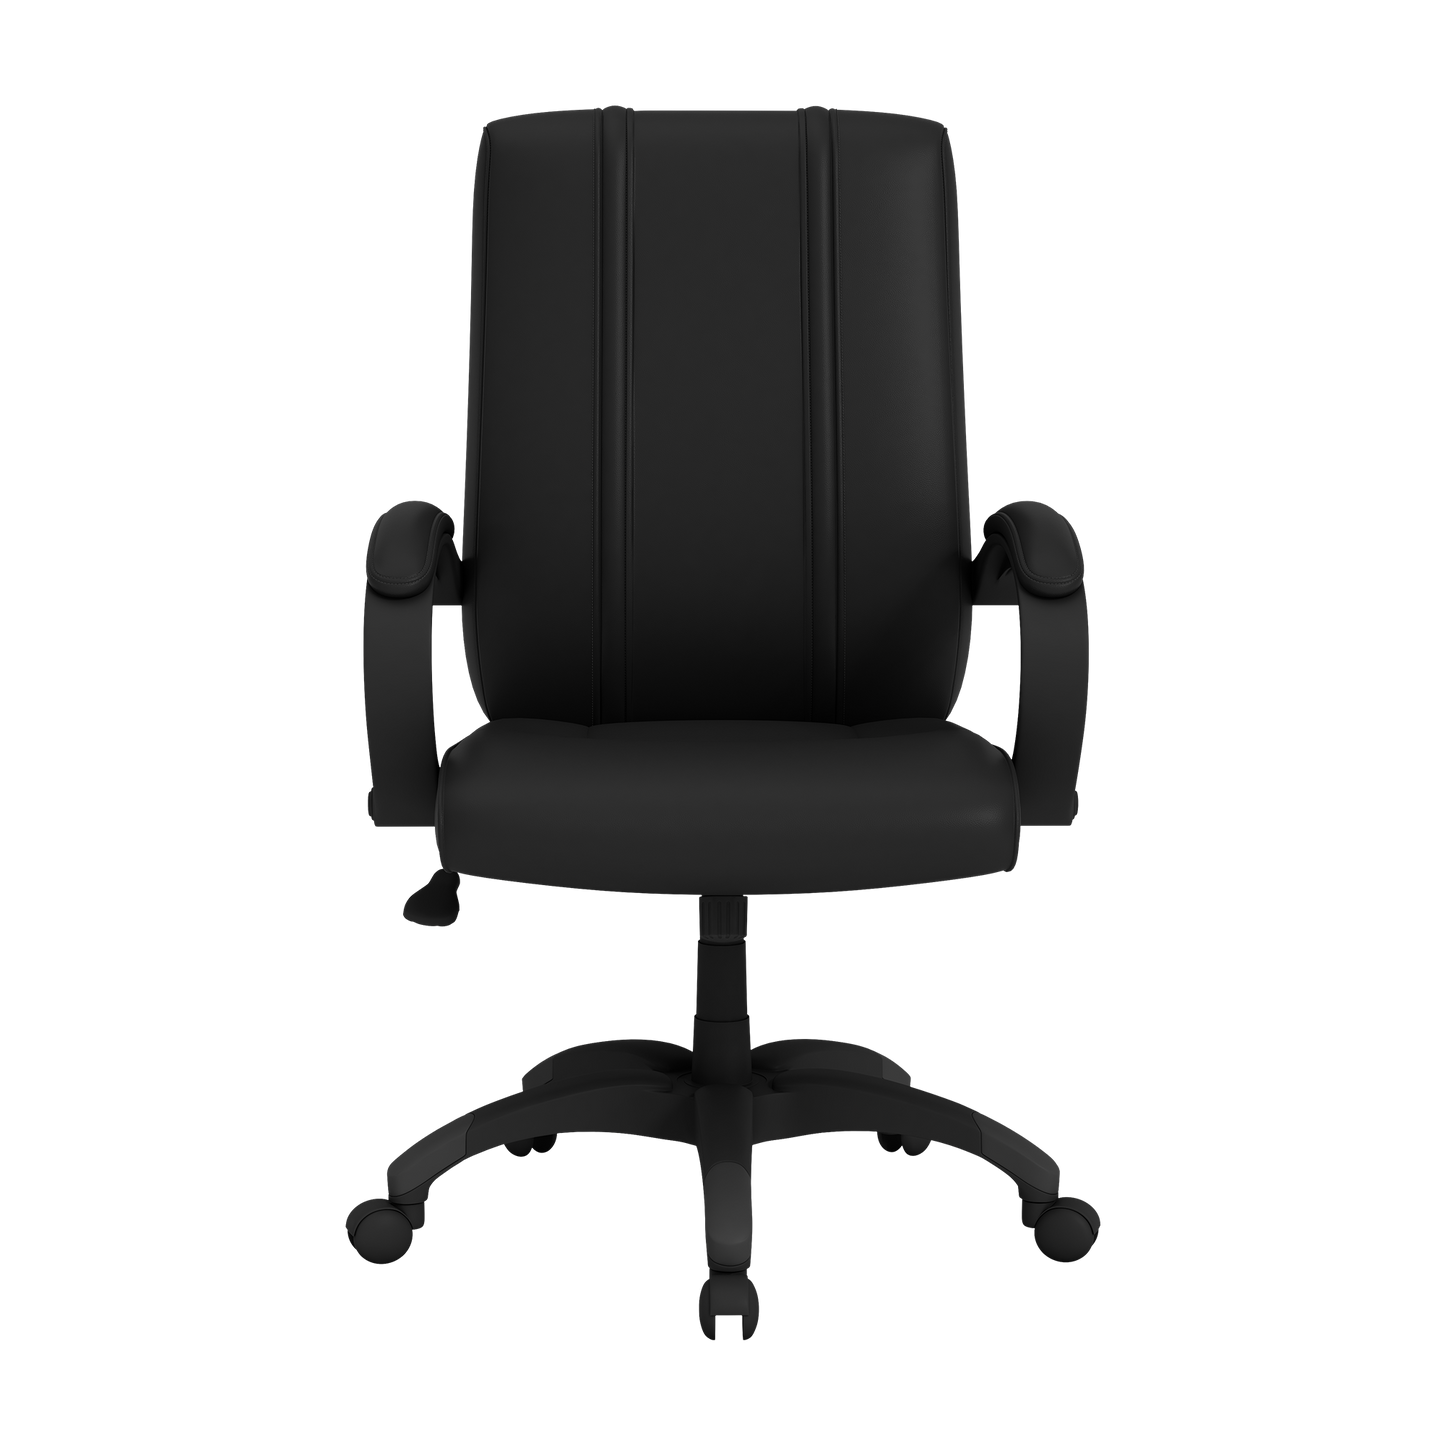 Office Chair 1000 with CF Montreal Primary Logo